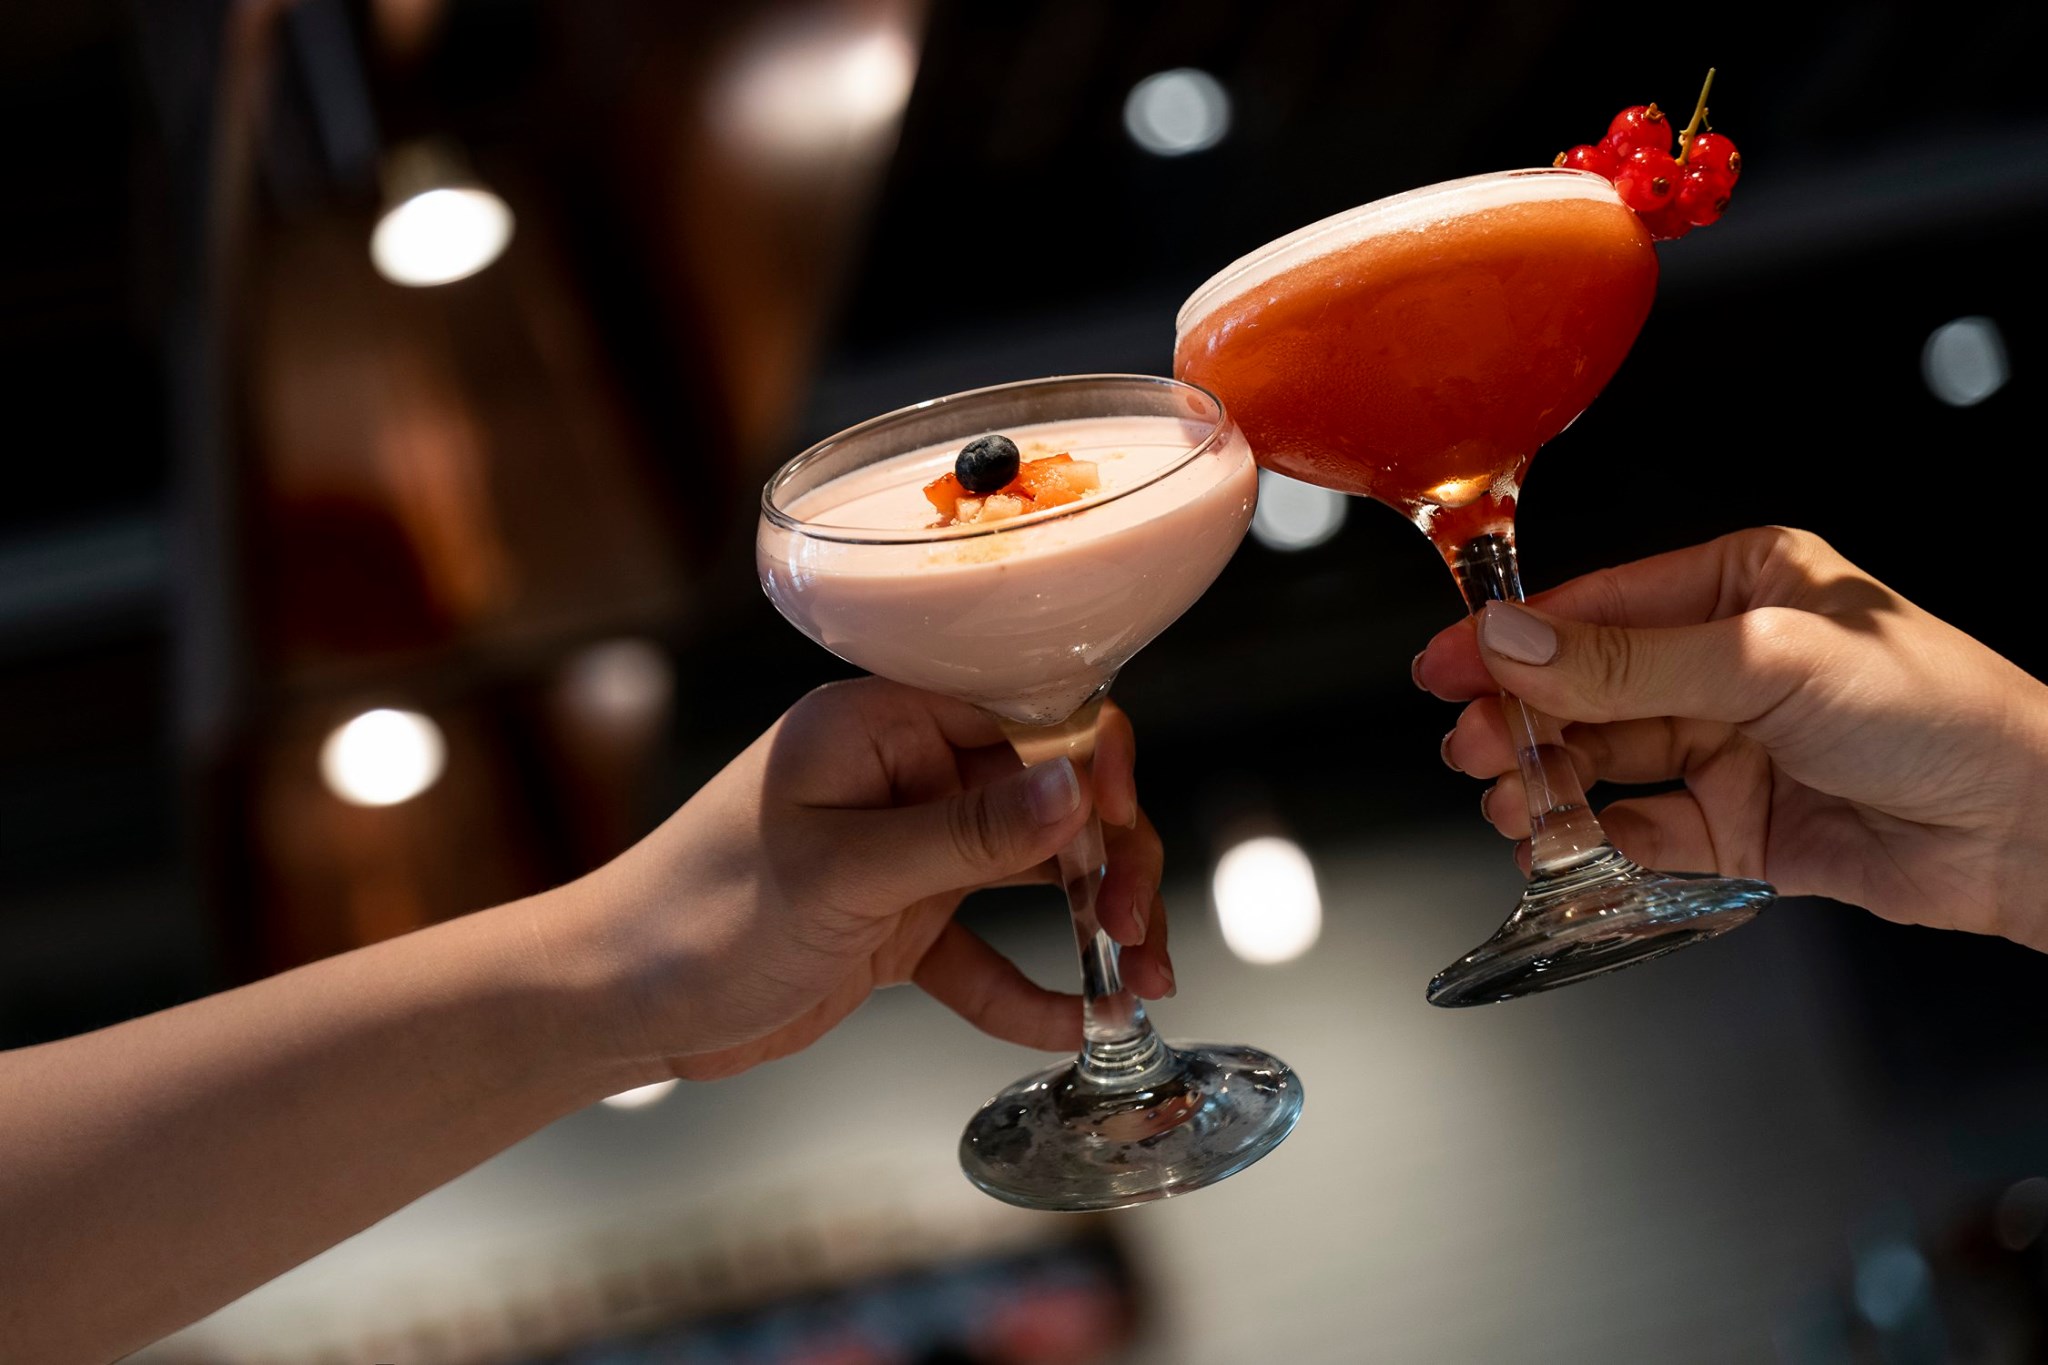 We're raising funds for the Hong Kong Hereditary Breast Cancer Family Registry throughout October.   Come and enjoy our special edition 'Bella Rosa' panna cotta dessert or start the evening the pink way with our refreshing Lampone Sidecar cocktail and we'll donate on your behalf.